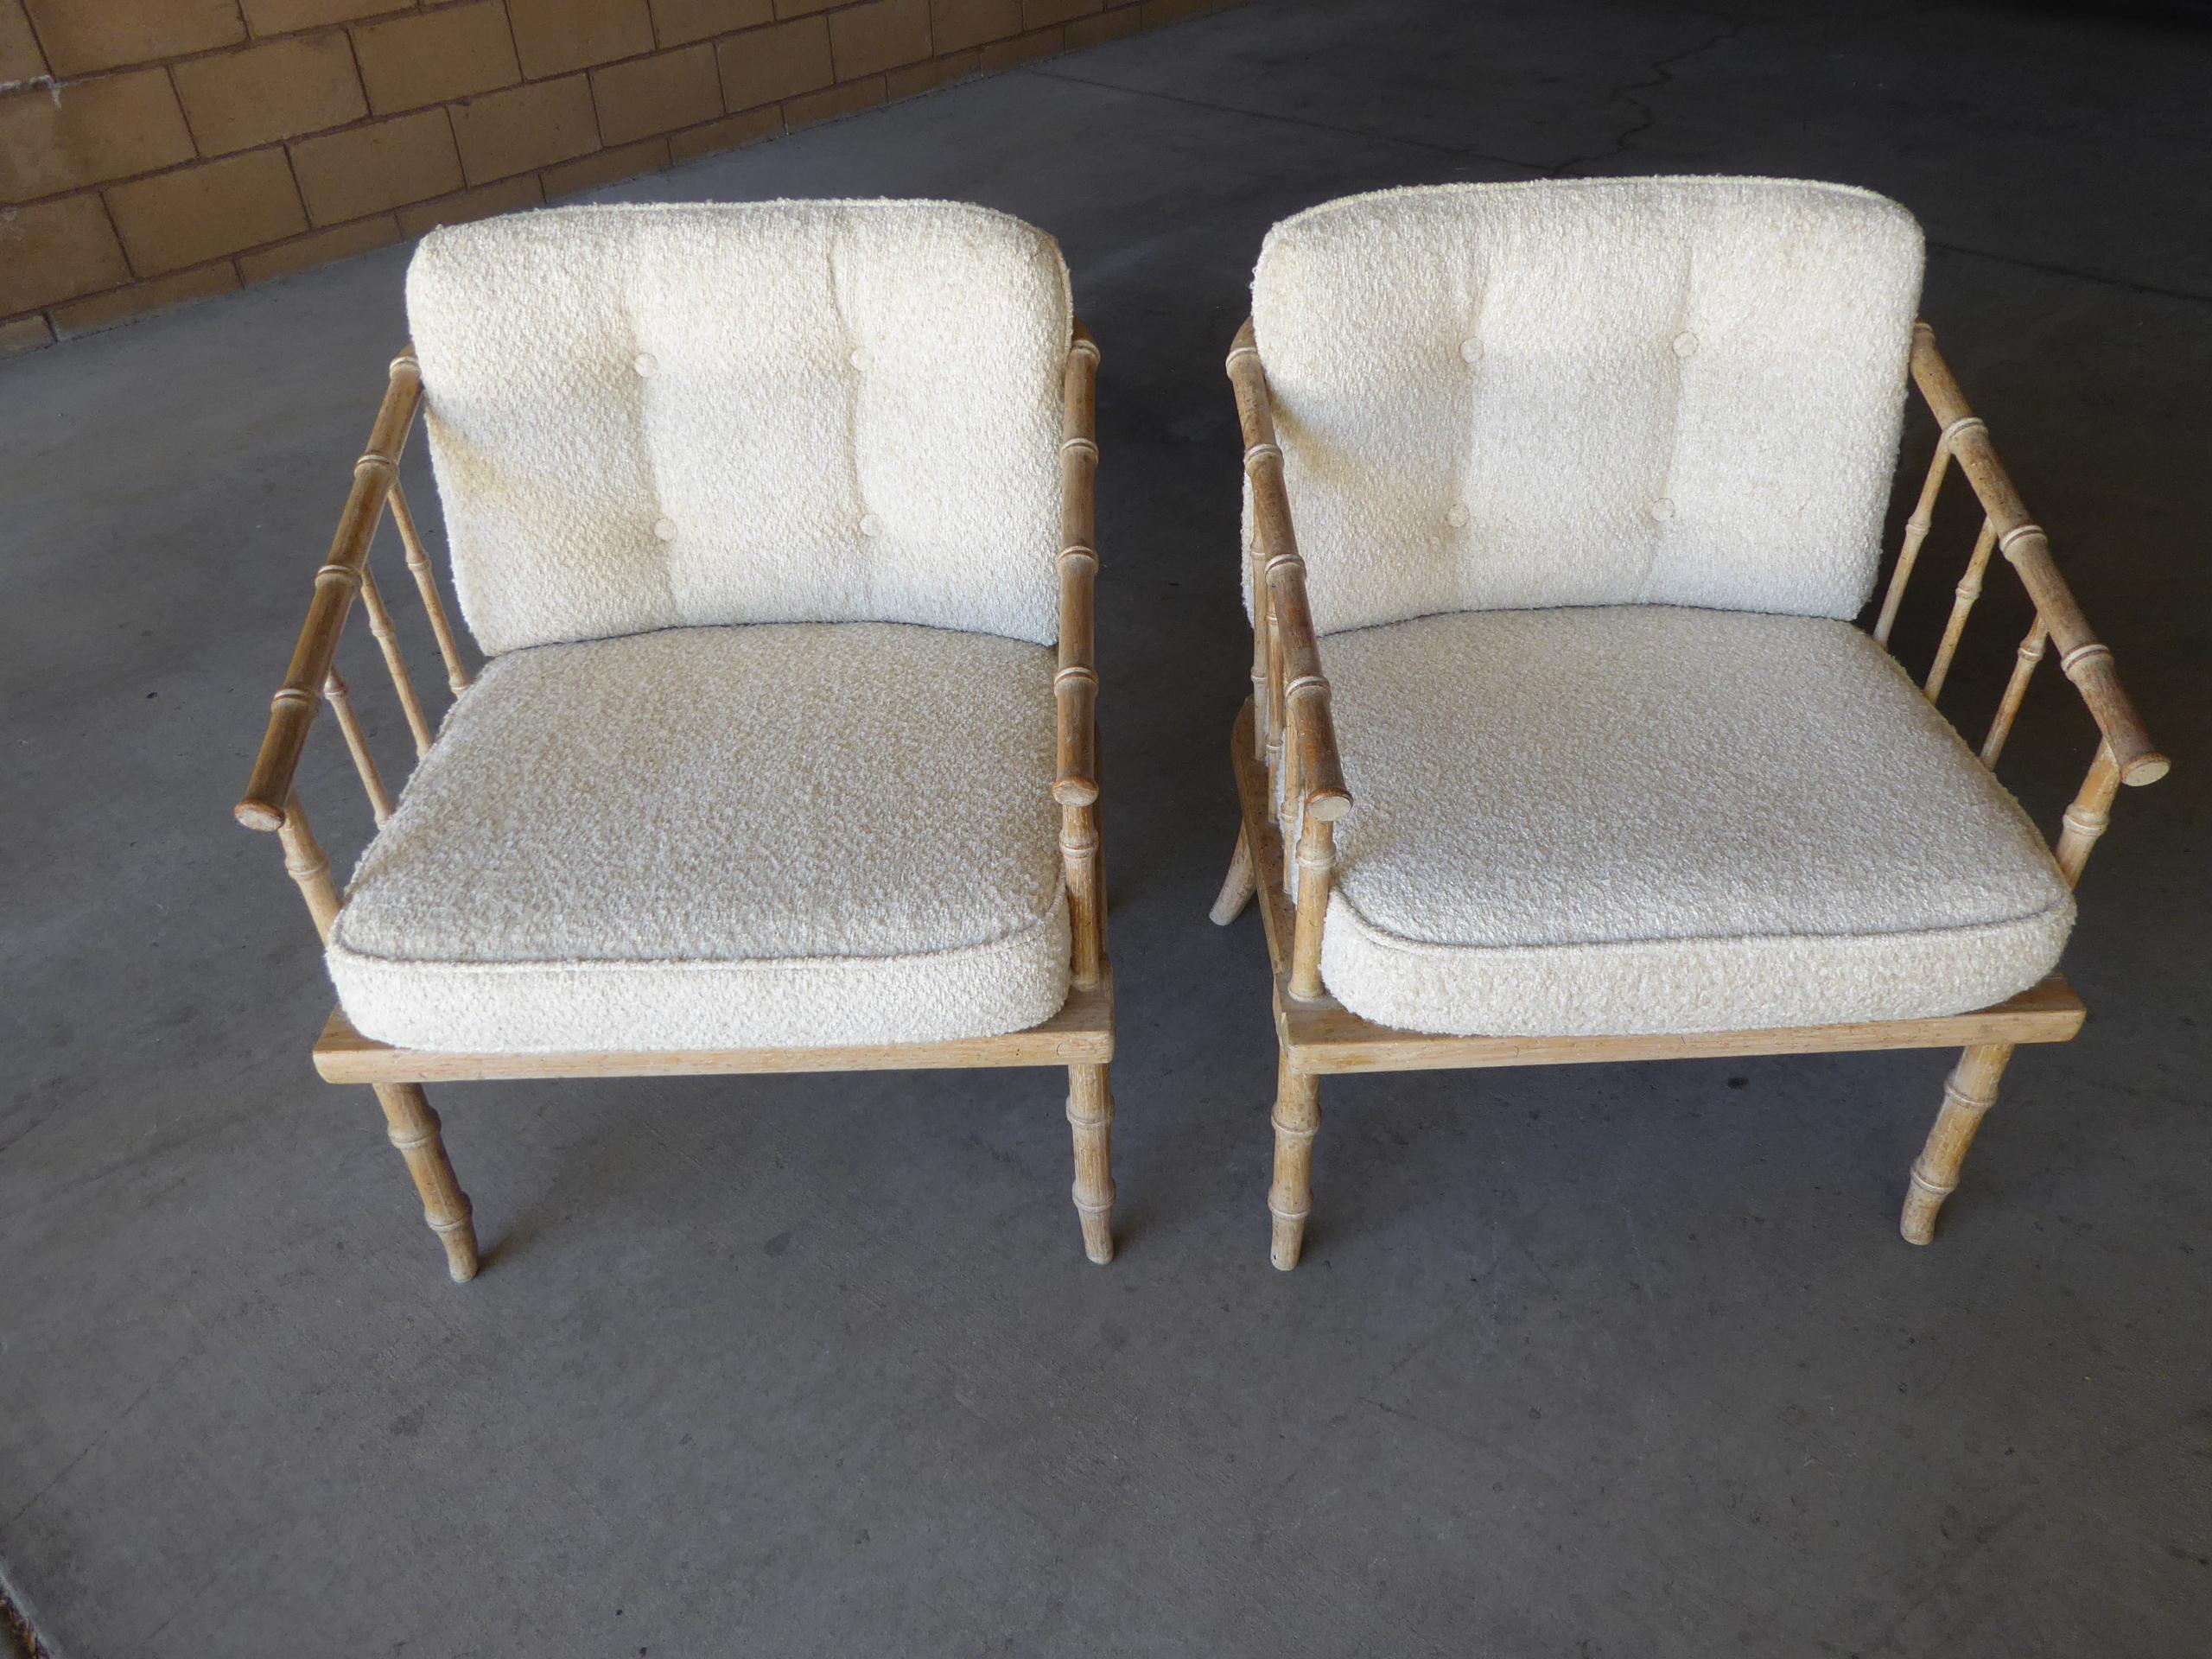 Carved Pair of Faux-Bamboo Armchairs Attributed to McGuire